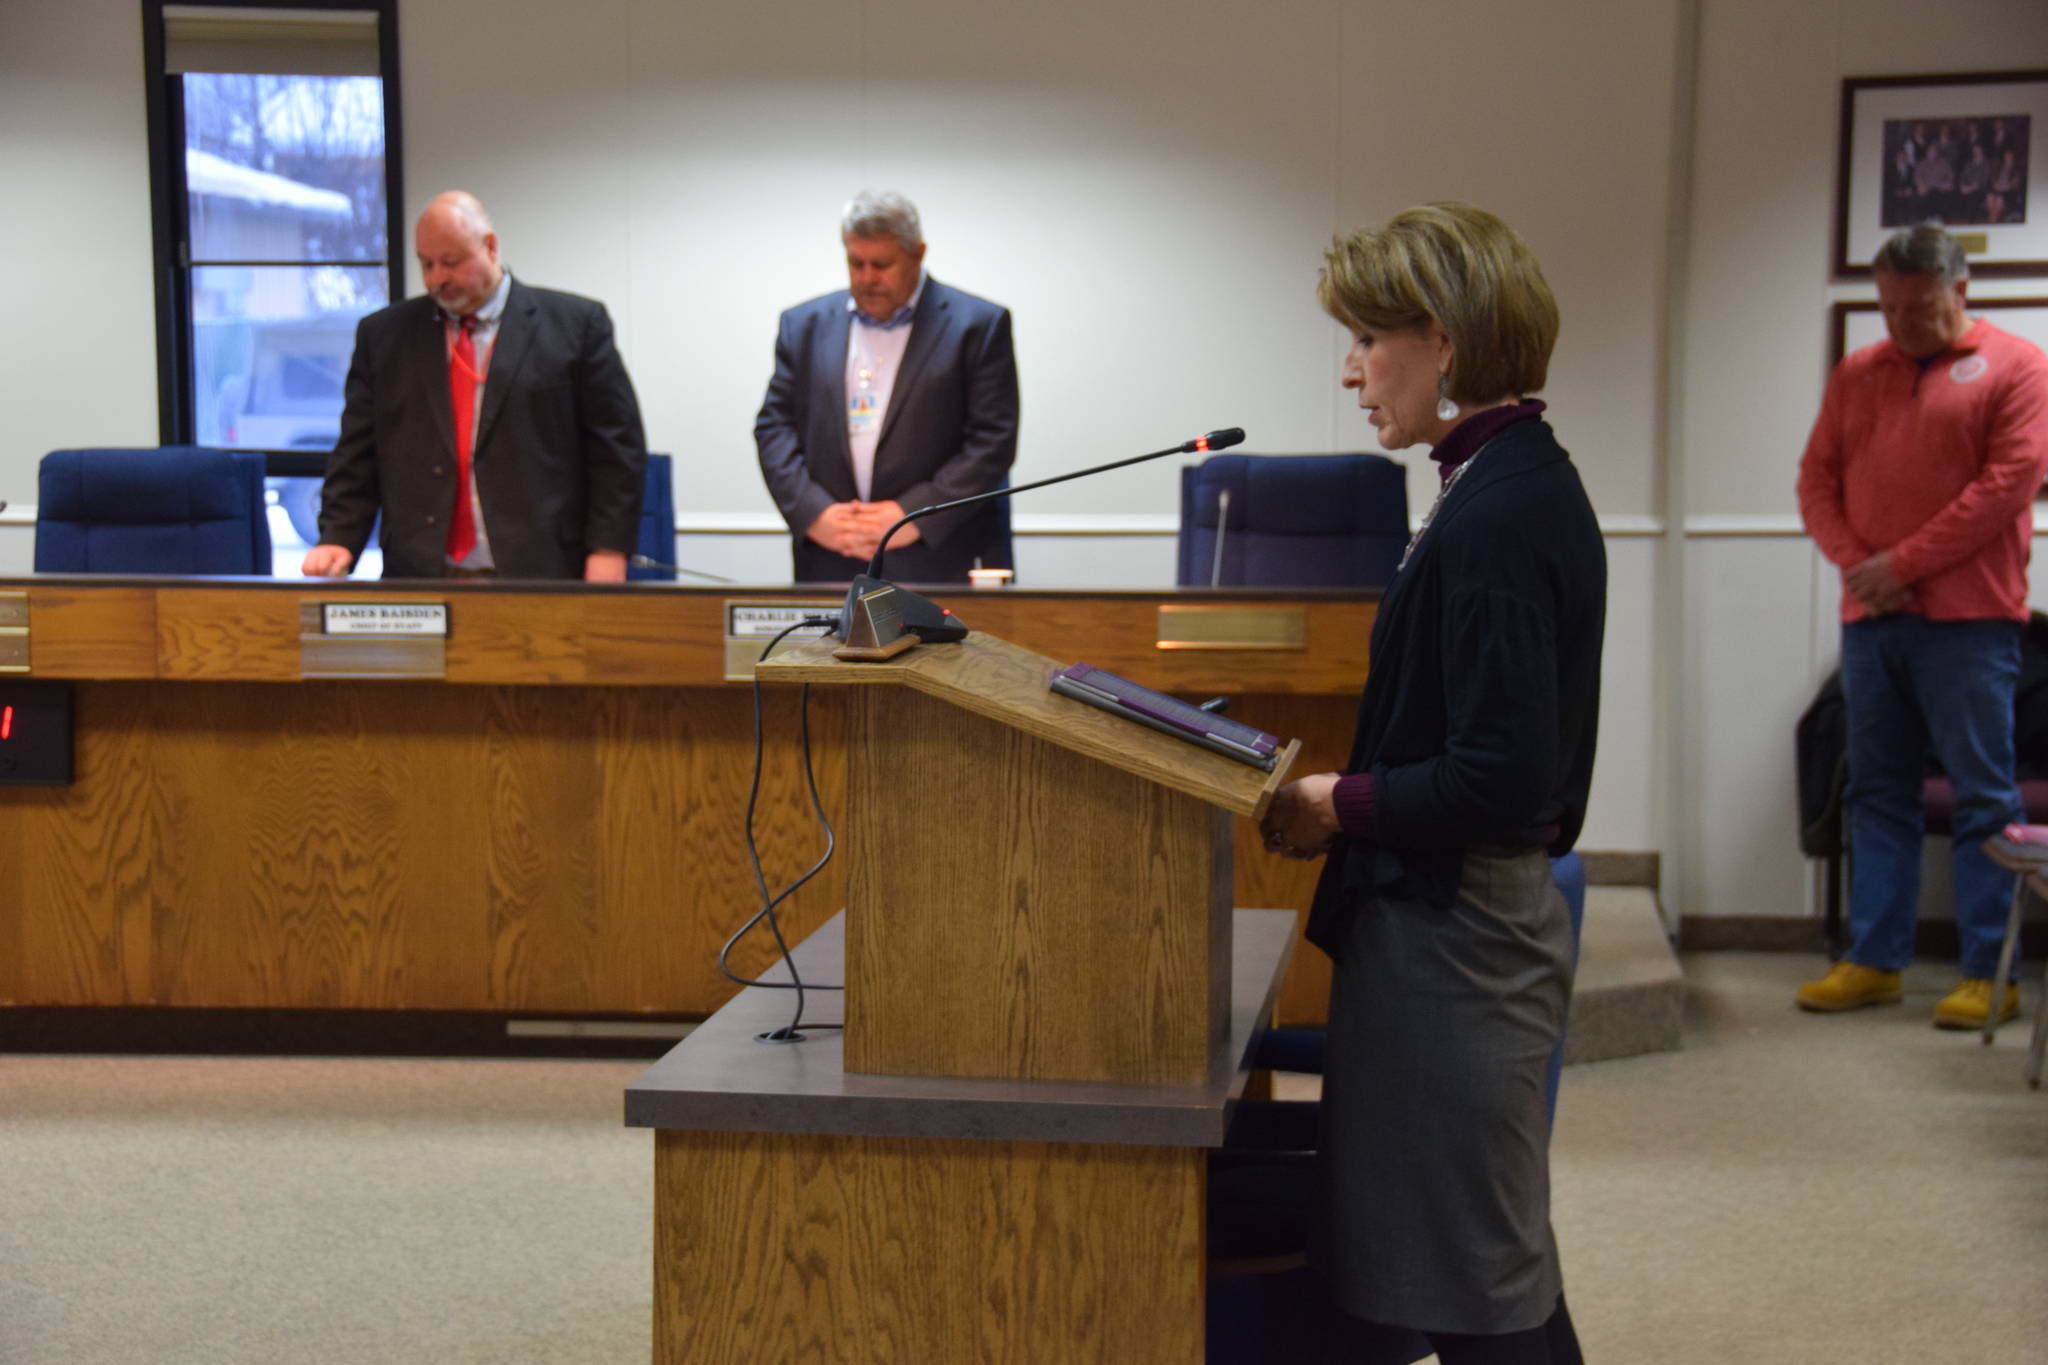 An invocation is given by Debbie Hamilton at the Kenai Peninsula Borough Assembly Meeting in Soldotna on March 5, 2019. (Photo by Brian Mazurek/Peninsula Clarion)